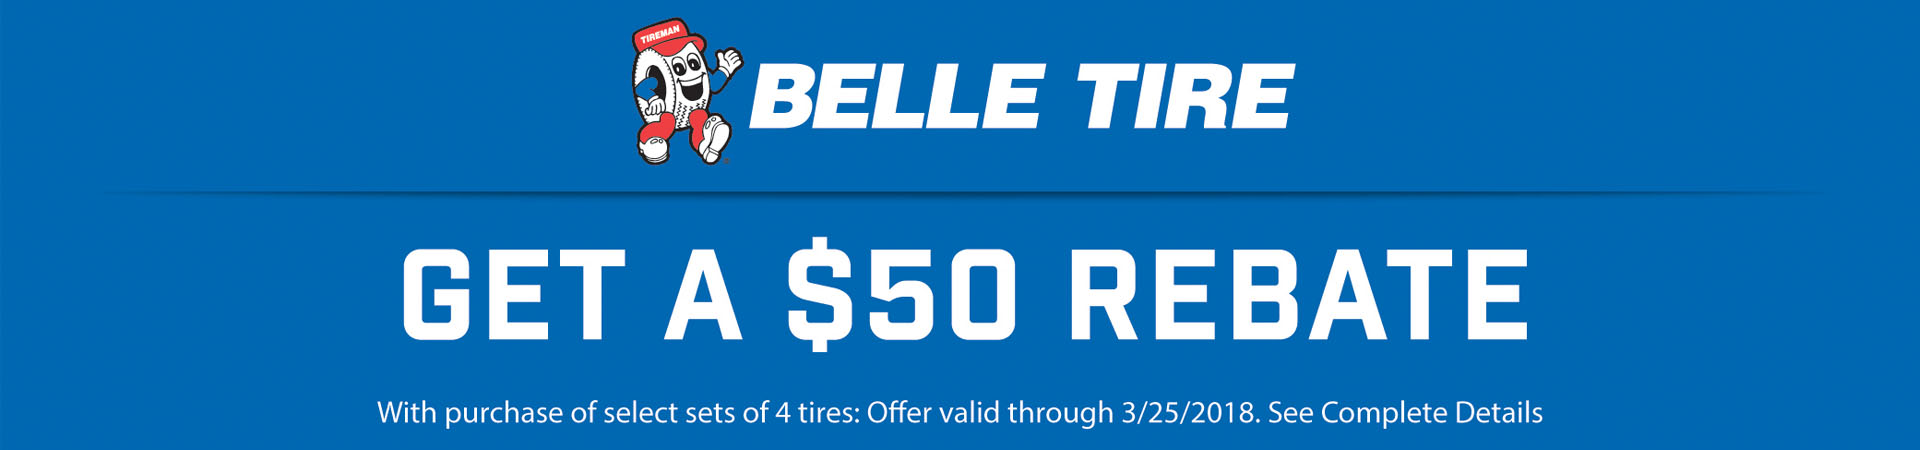 belle-tire-tire-coupons-manufacturer-rebates